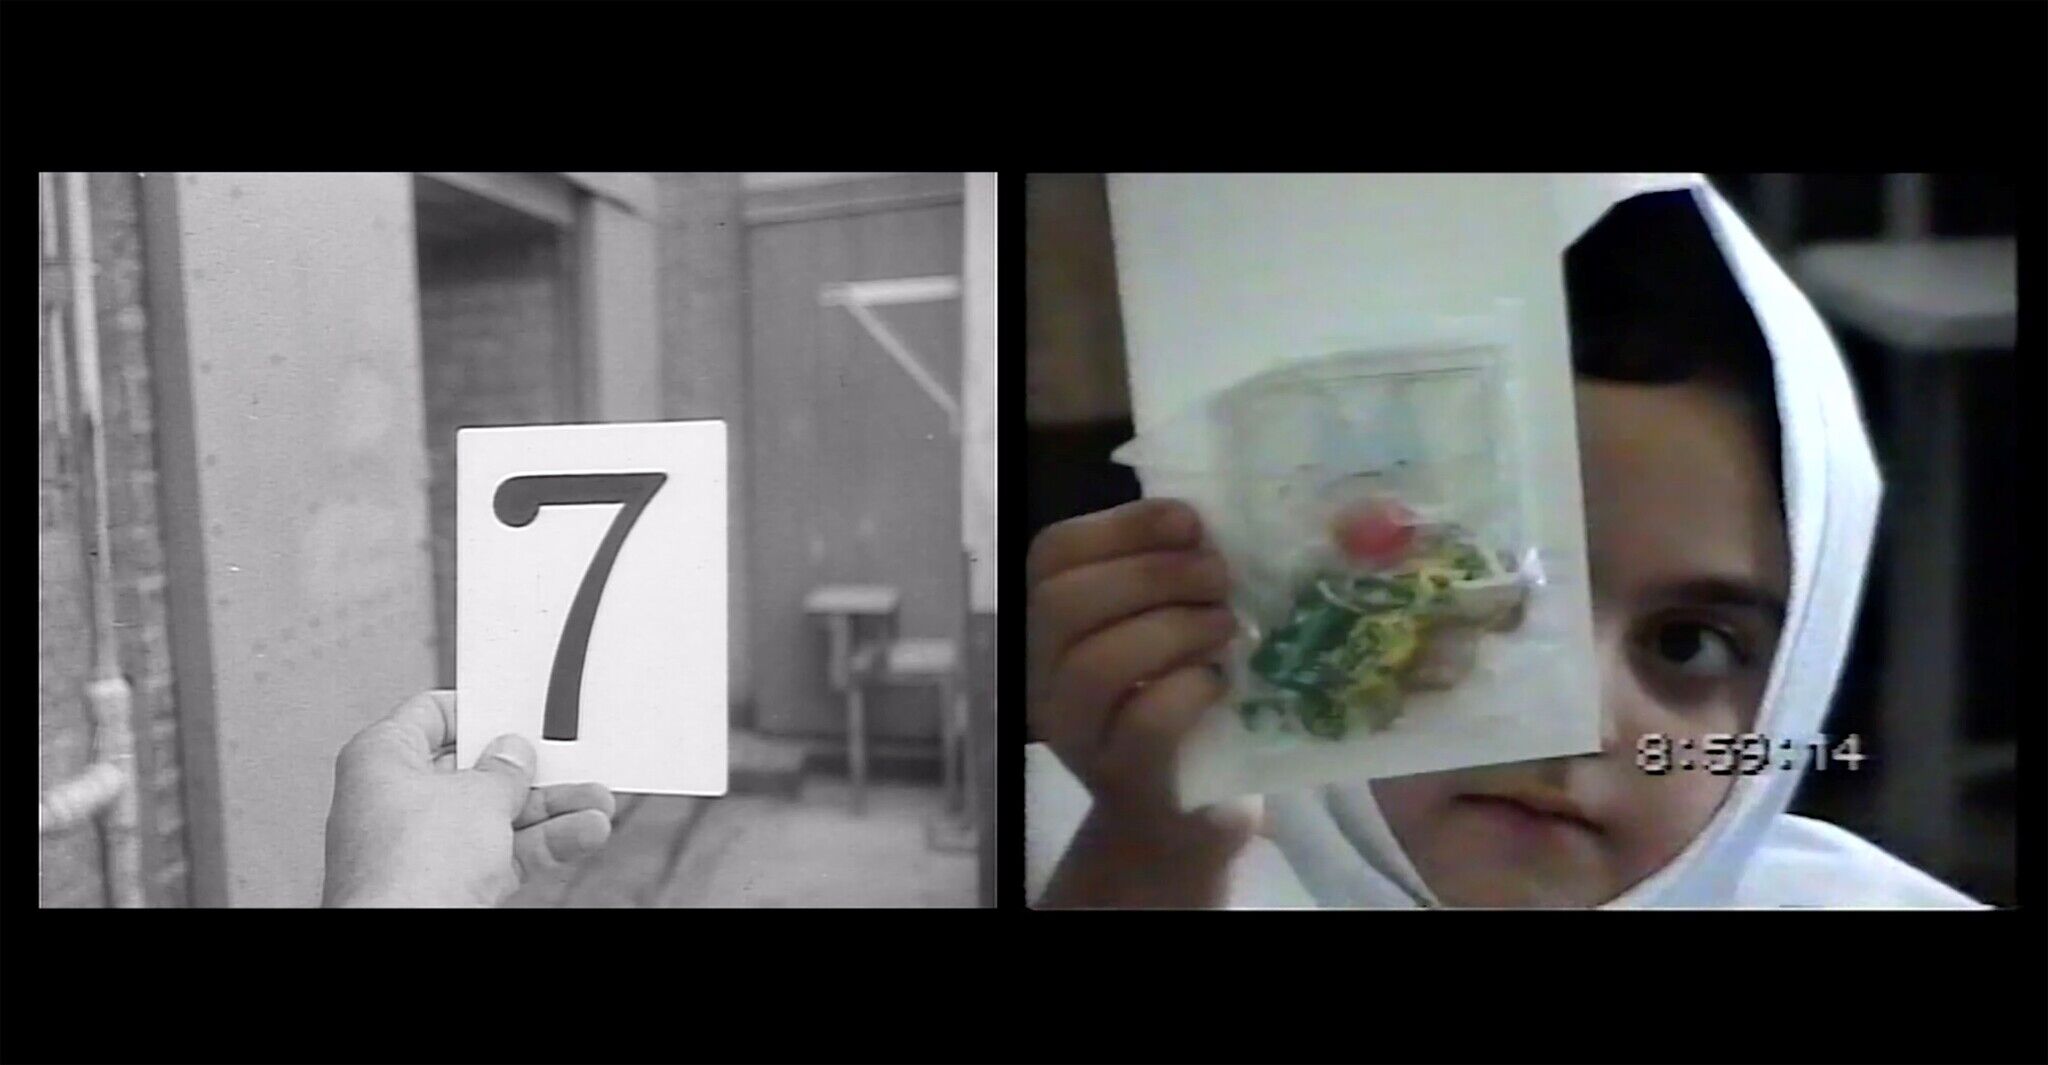 Split screen with a hand holding a number 7 card on the left and a child peeking from behind a clear bag with objects on the right.